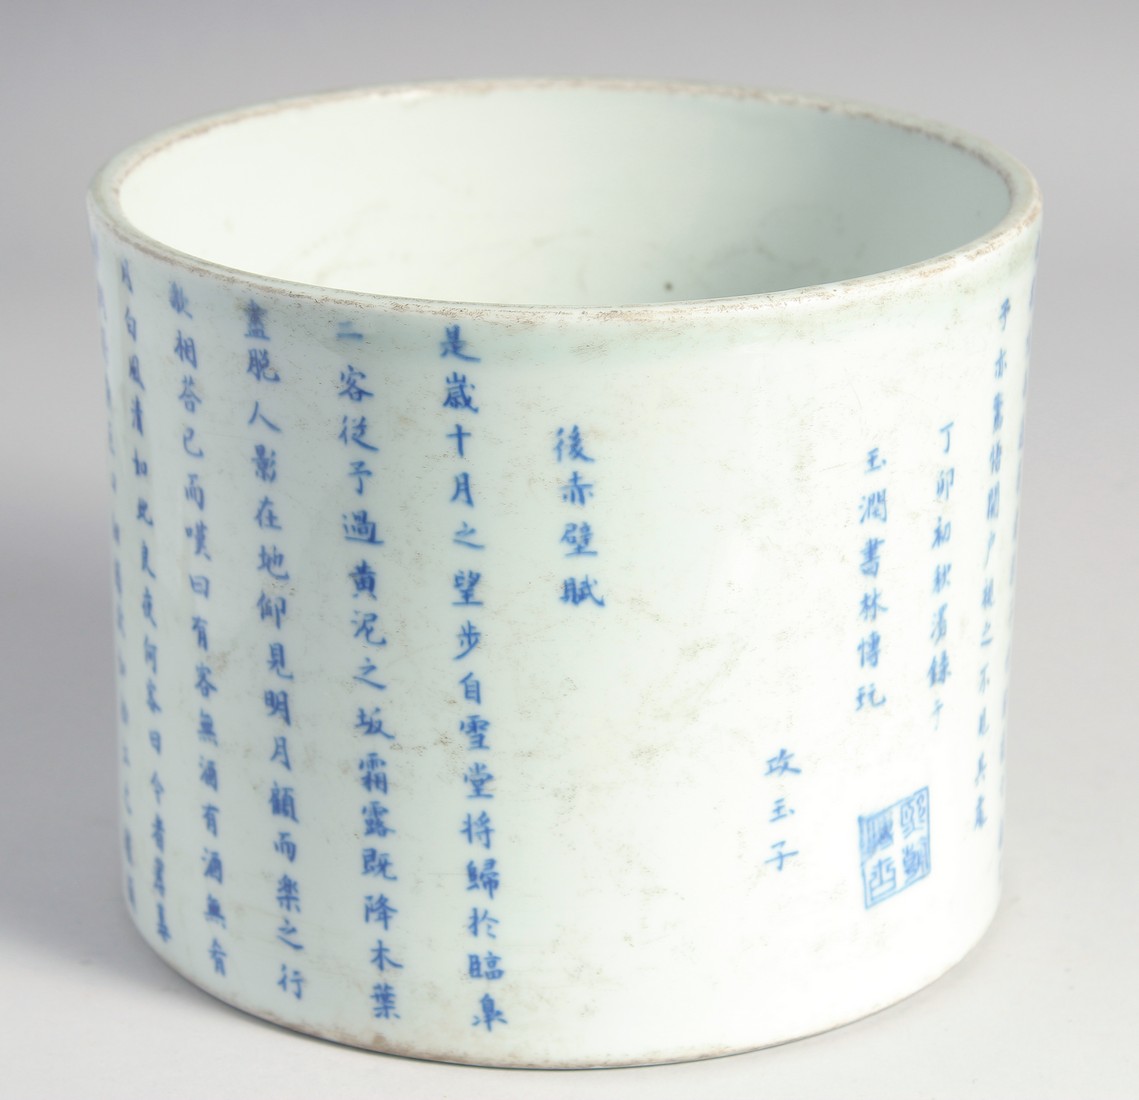 A LARGE CHINESE BLUE AND WHITE PORCELAIN BRUSH POT, the exterior with rows of characters, the base - Image 4 of 7